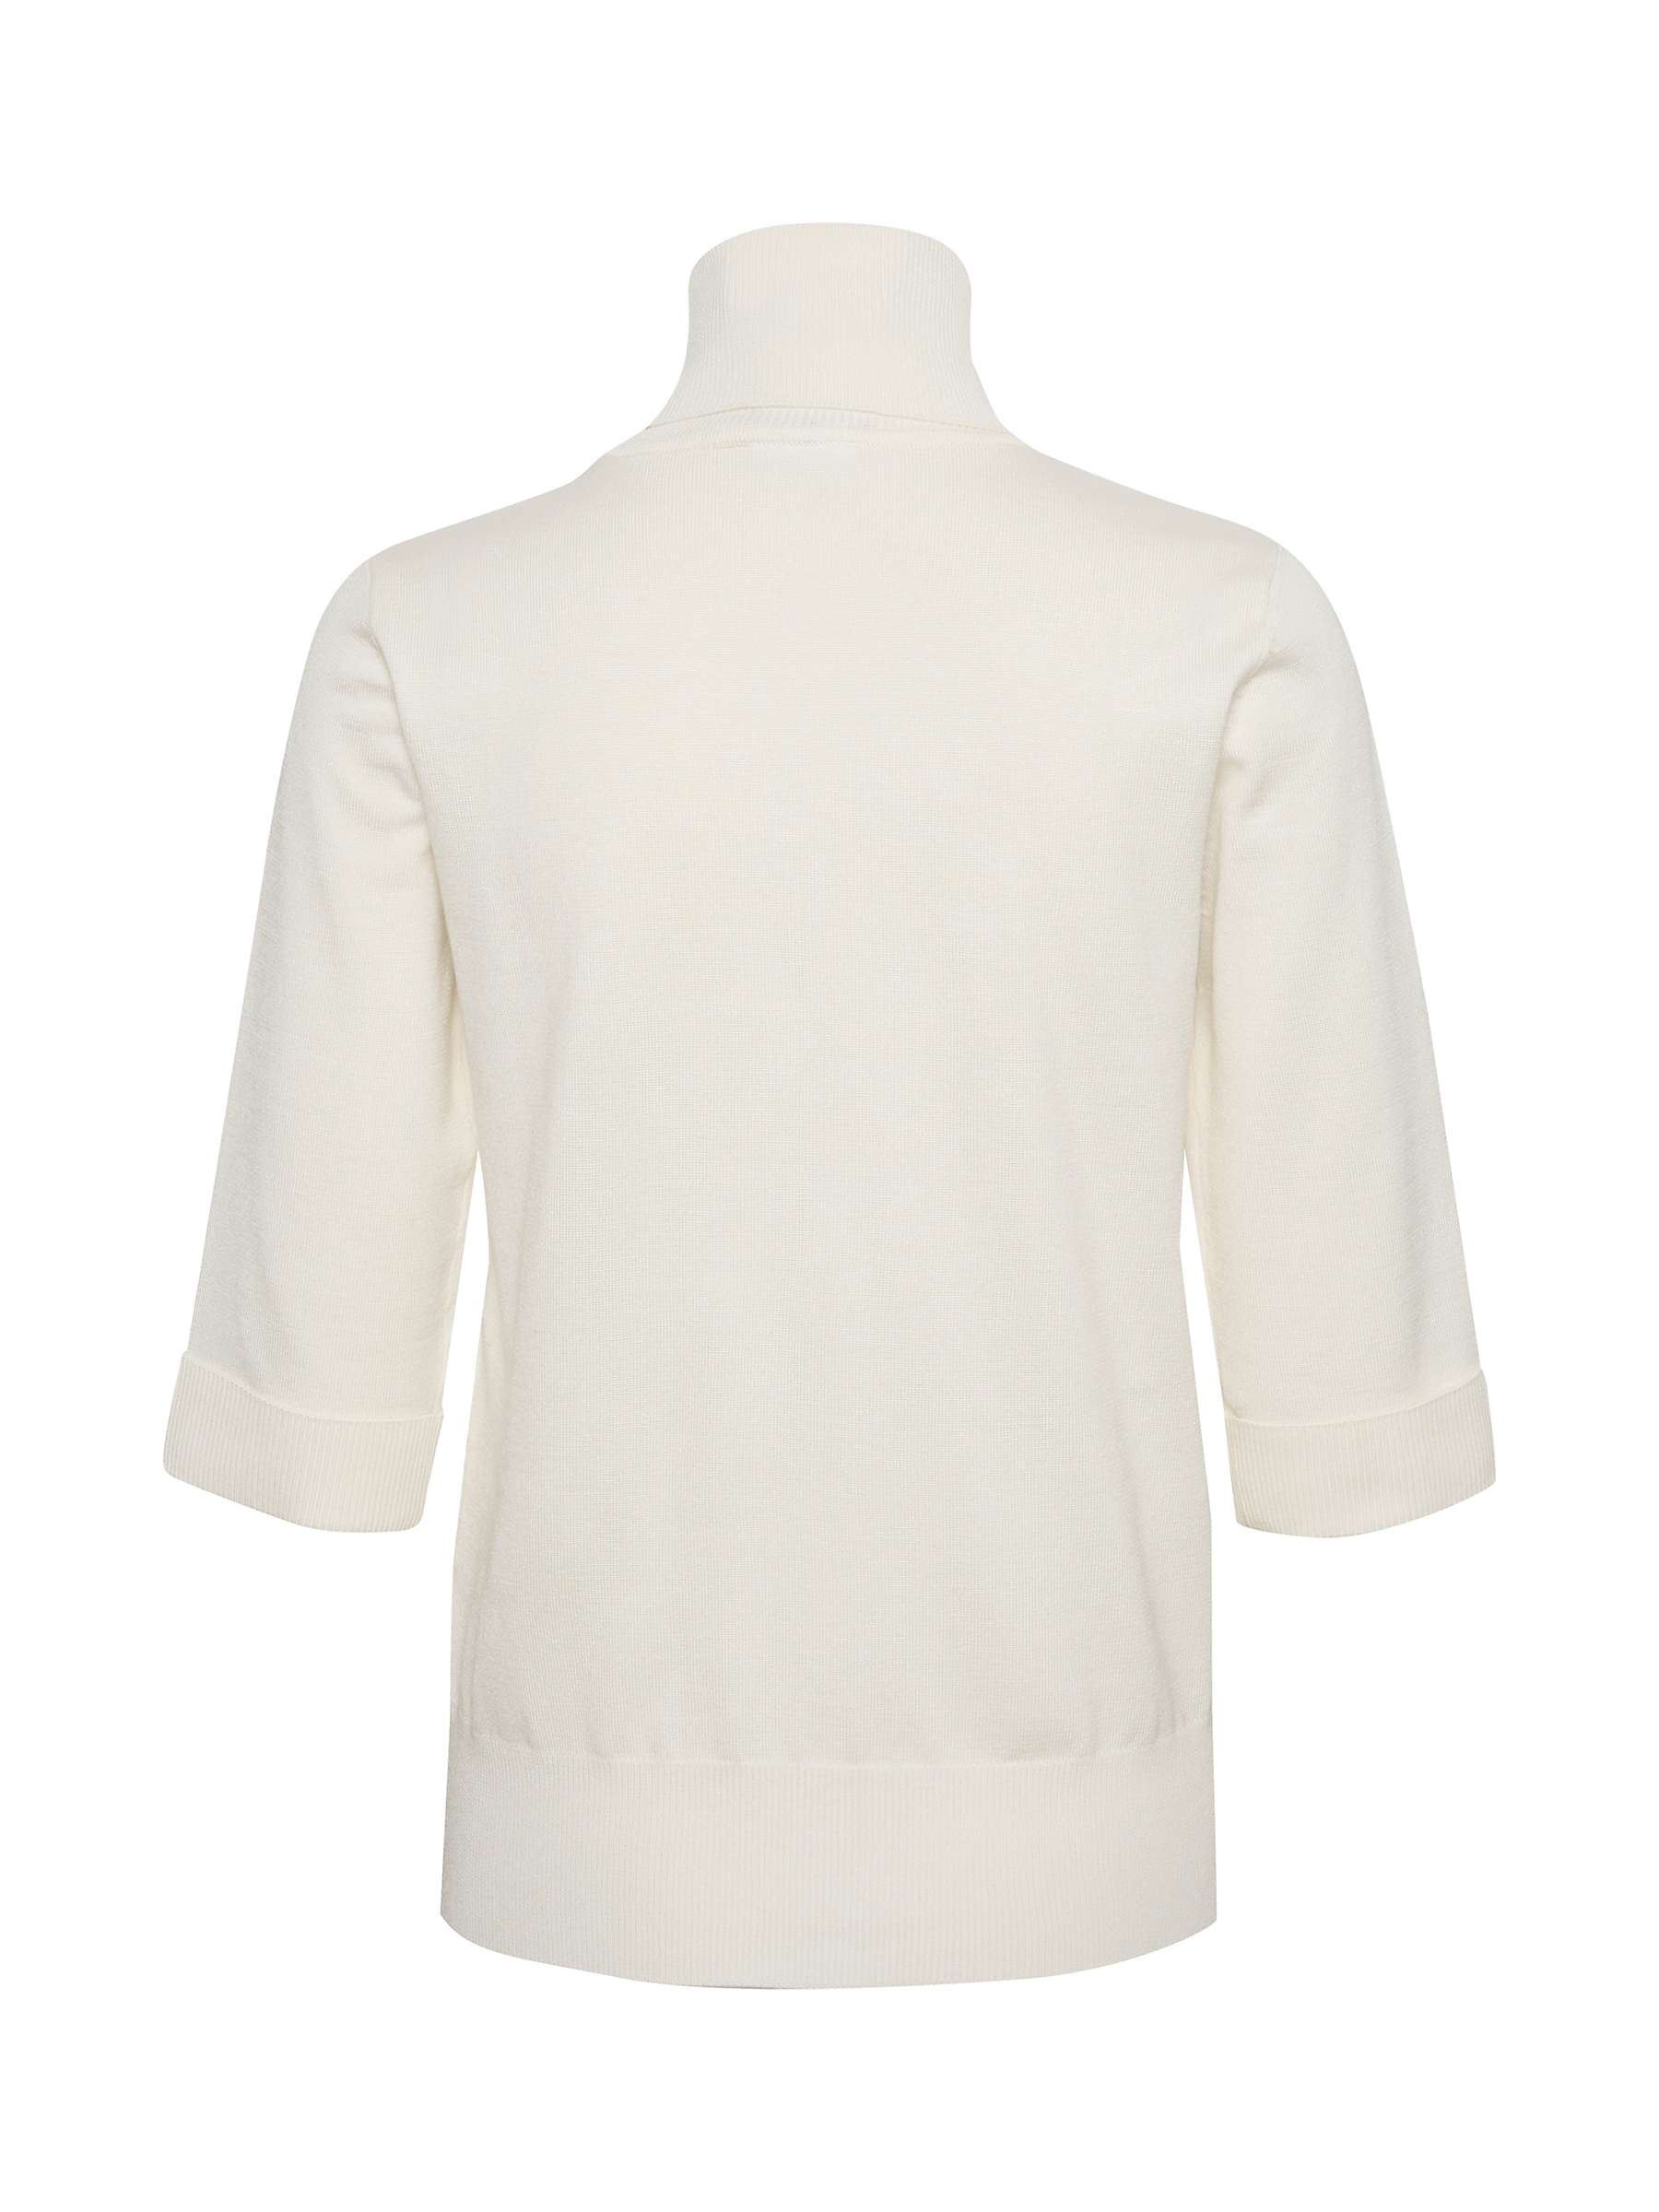 Buy Saint Tropez Cropped Sleeve Roll Neck Jumper, Ice Online at johnlewis.com